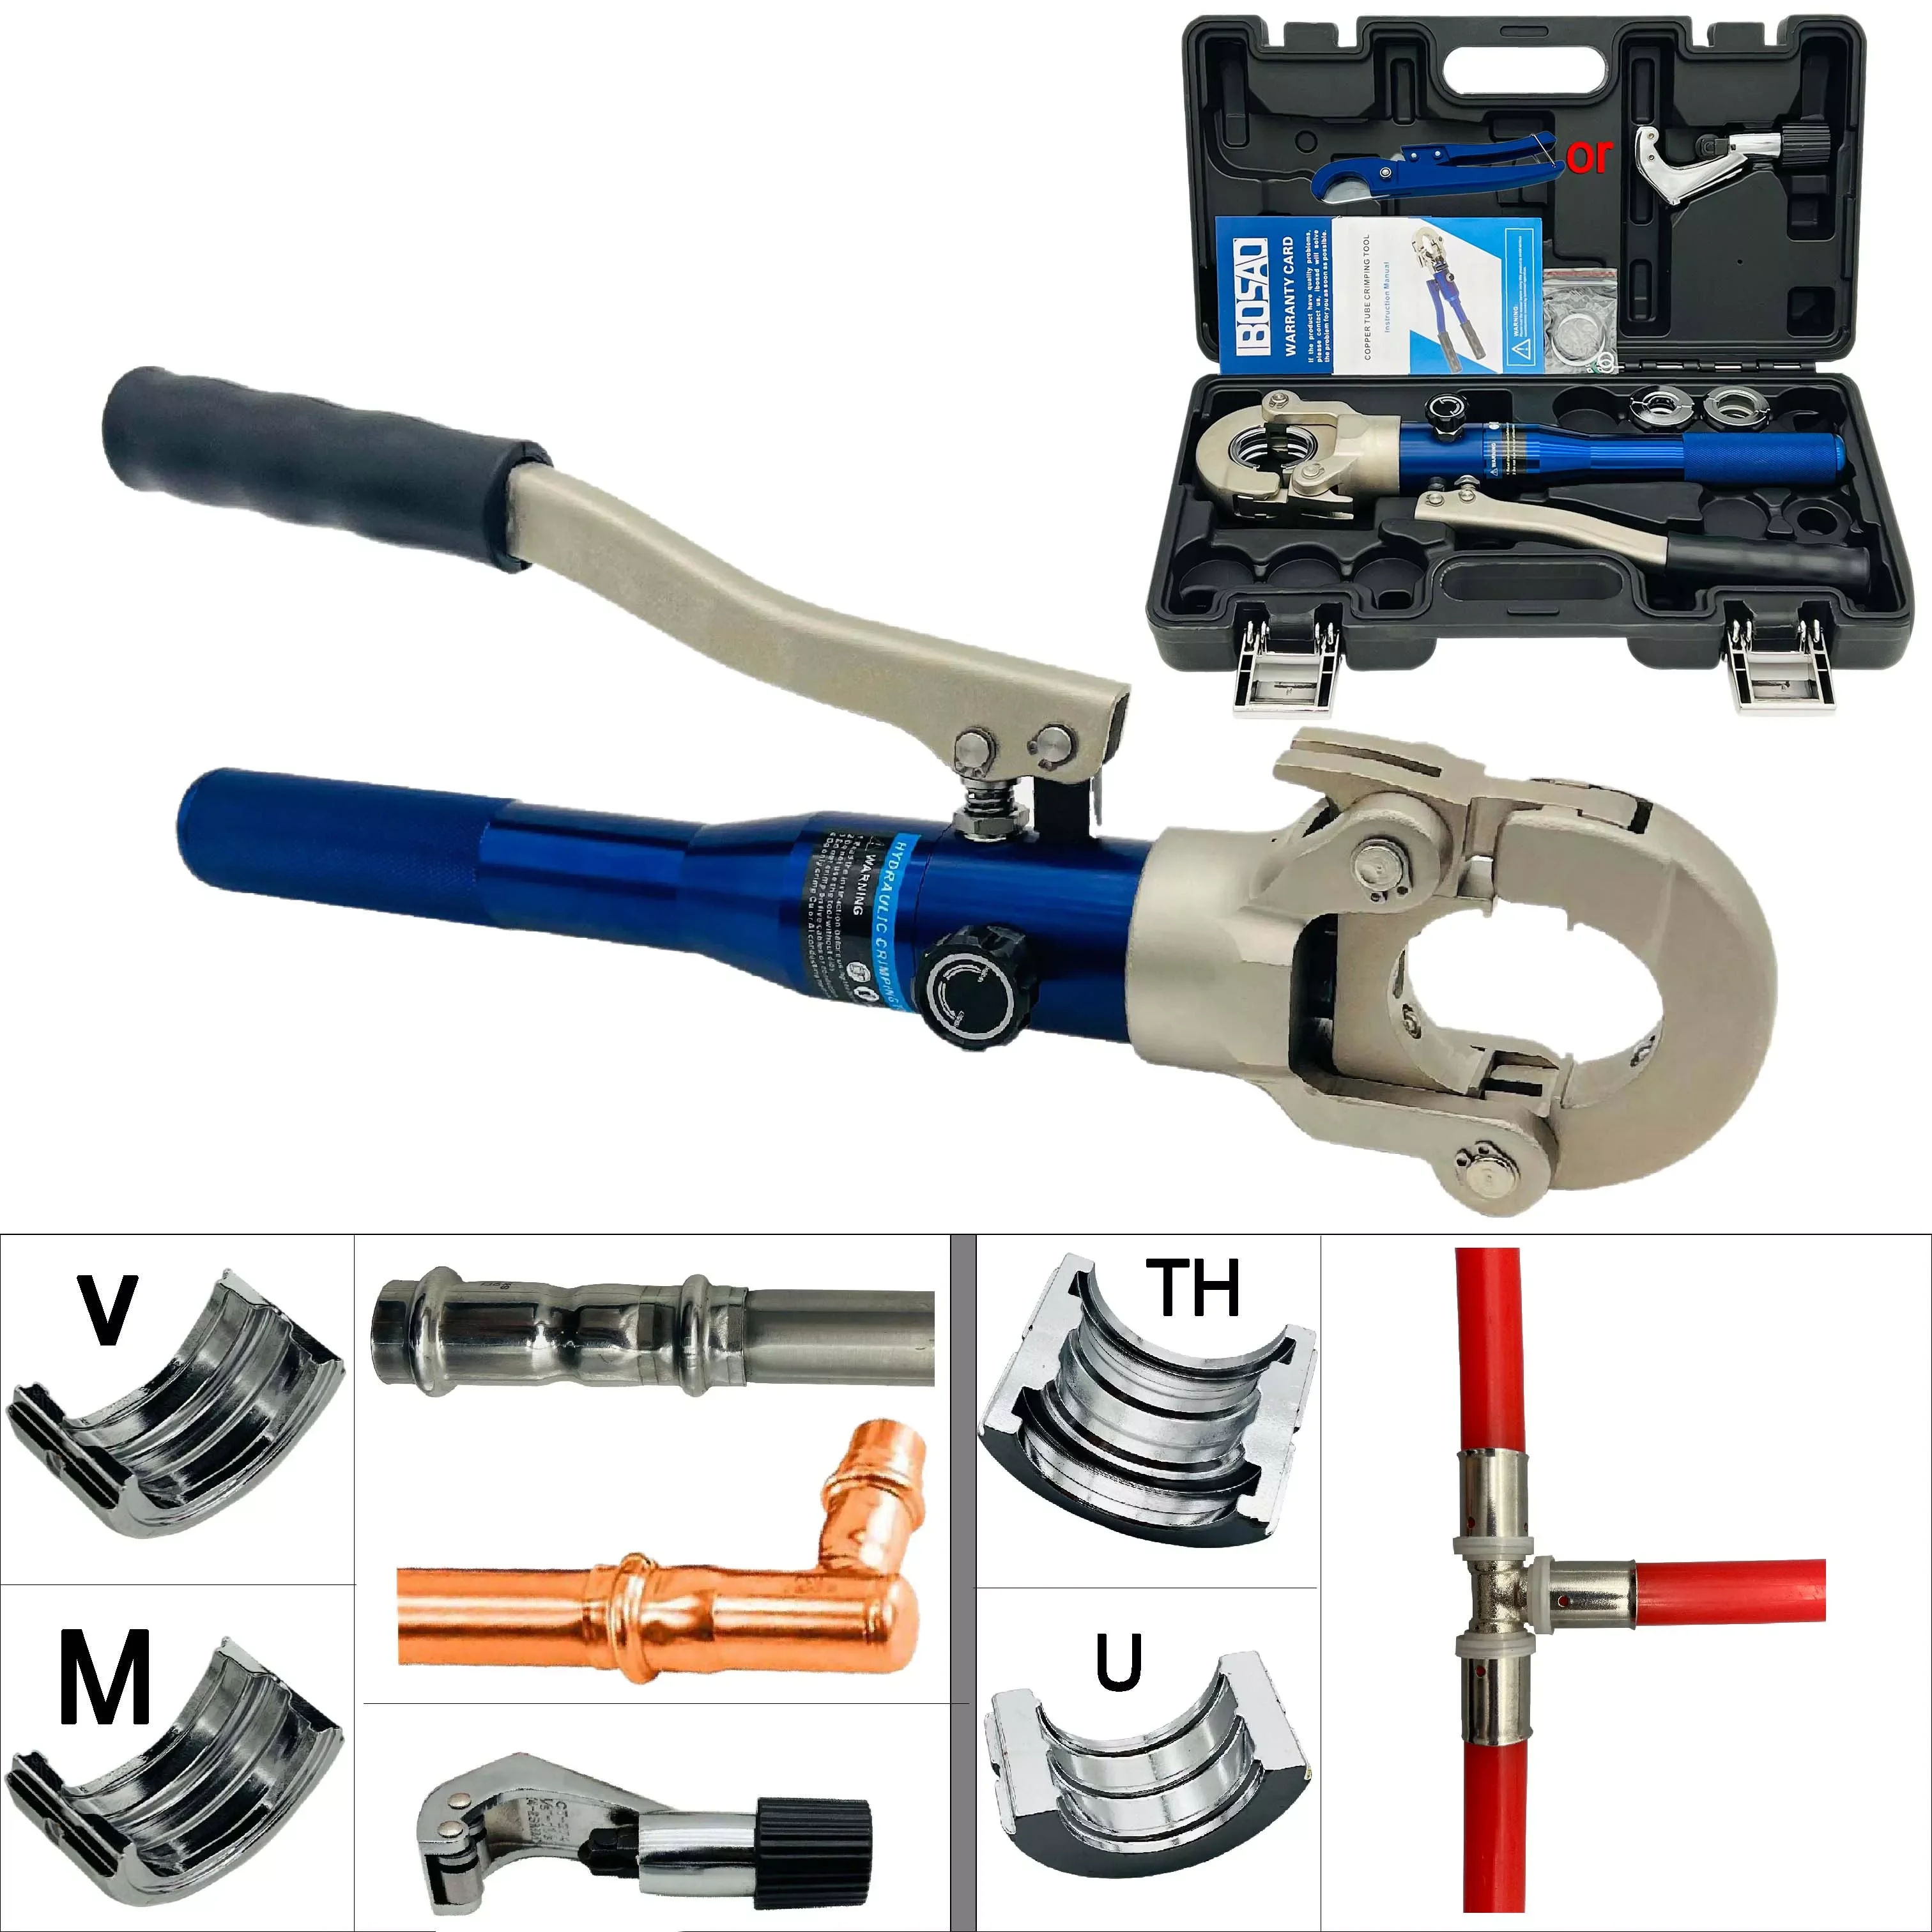 

Hydraulic Pex Pipe Crimping Tools Pressing Plumbing Tools for Pex,Stainless Steel and Copper Pipe with TH,U,V,M,VUS,VAU jaws